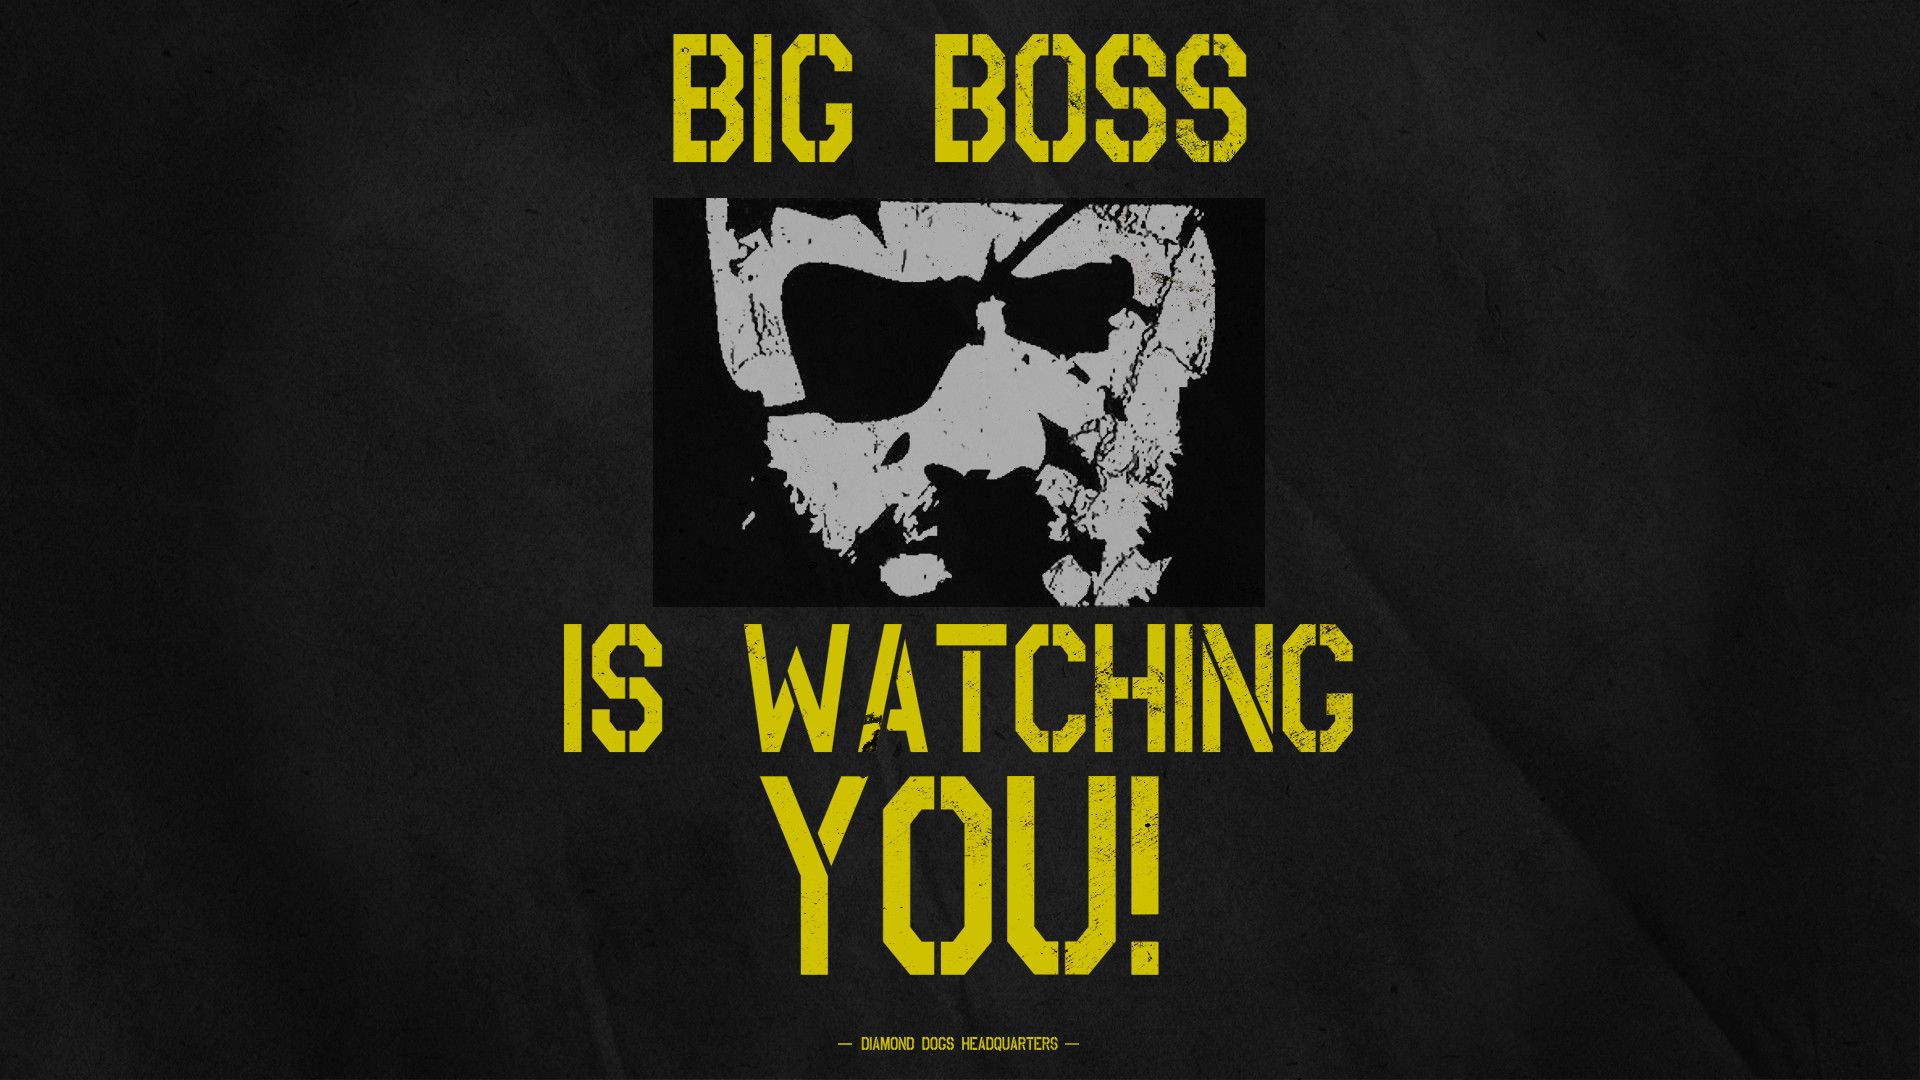 Boss wallpapers hd, desktop backgrounds, images and pictures